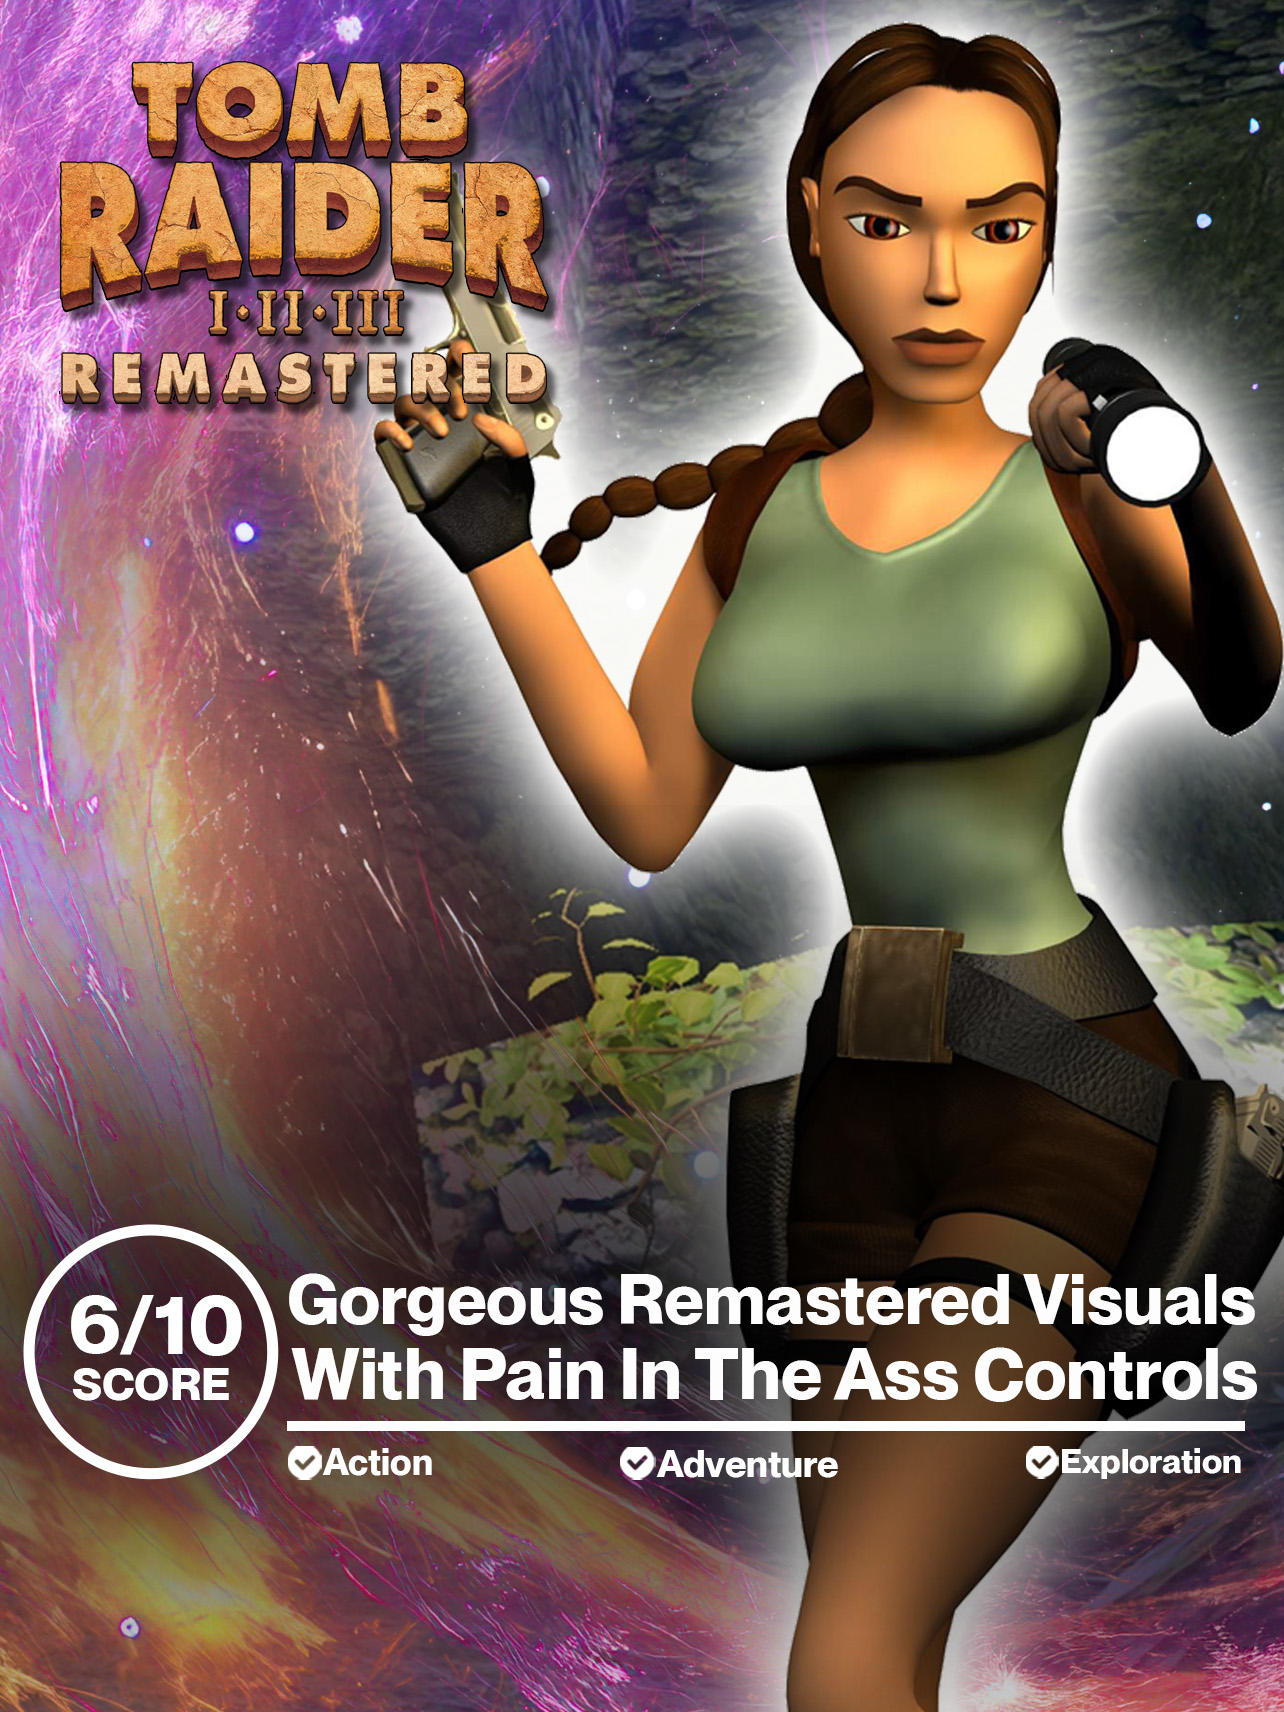 Tomb Raider I - III Remastered: Nostalgia With GREAT REMASTERED VISUALS, But FRUSTRATING Controls!